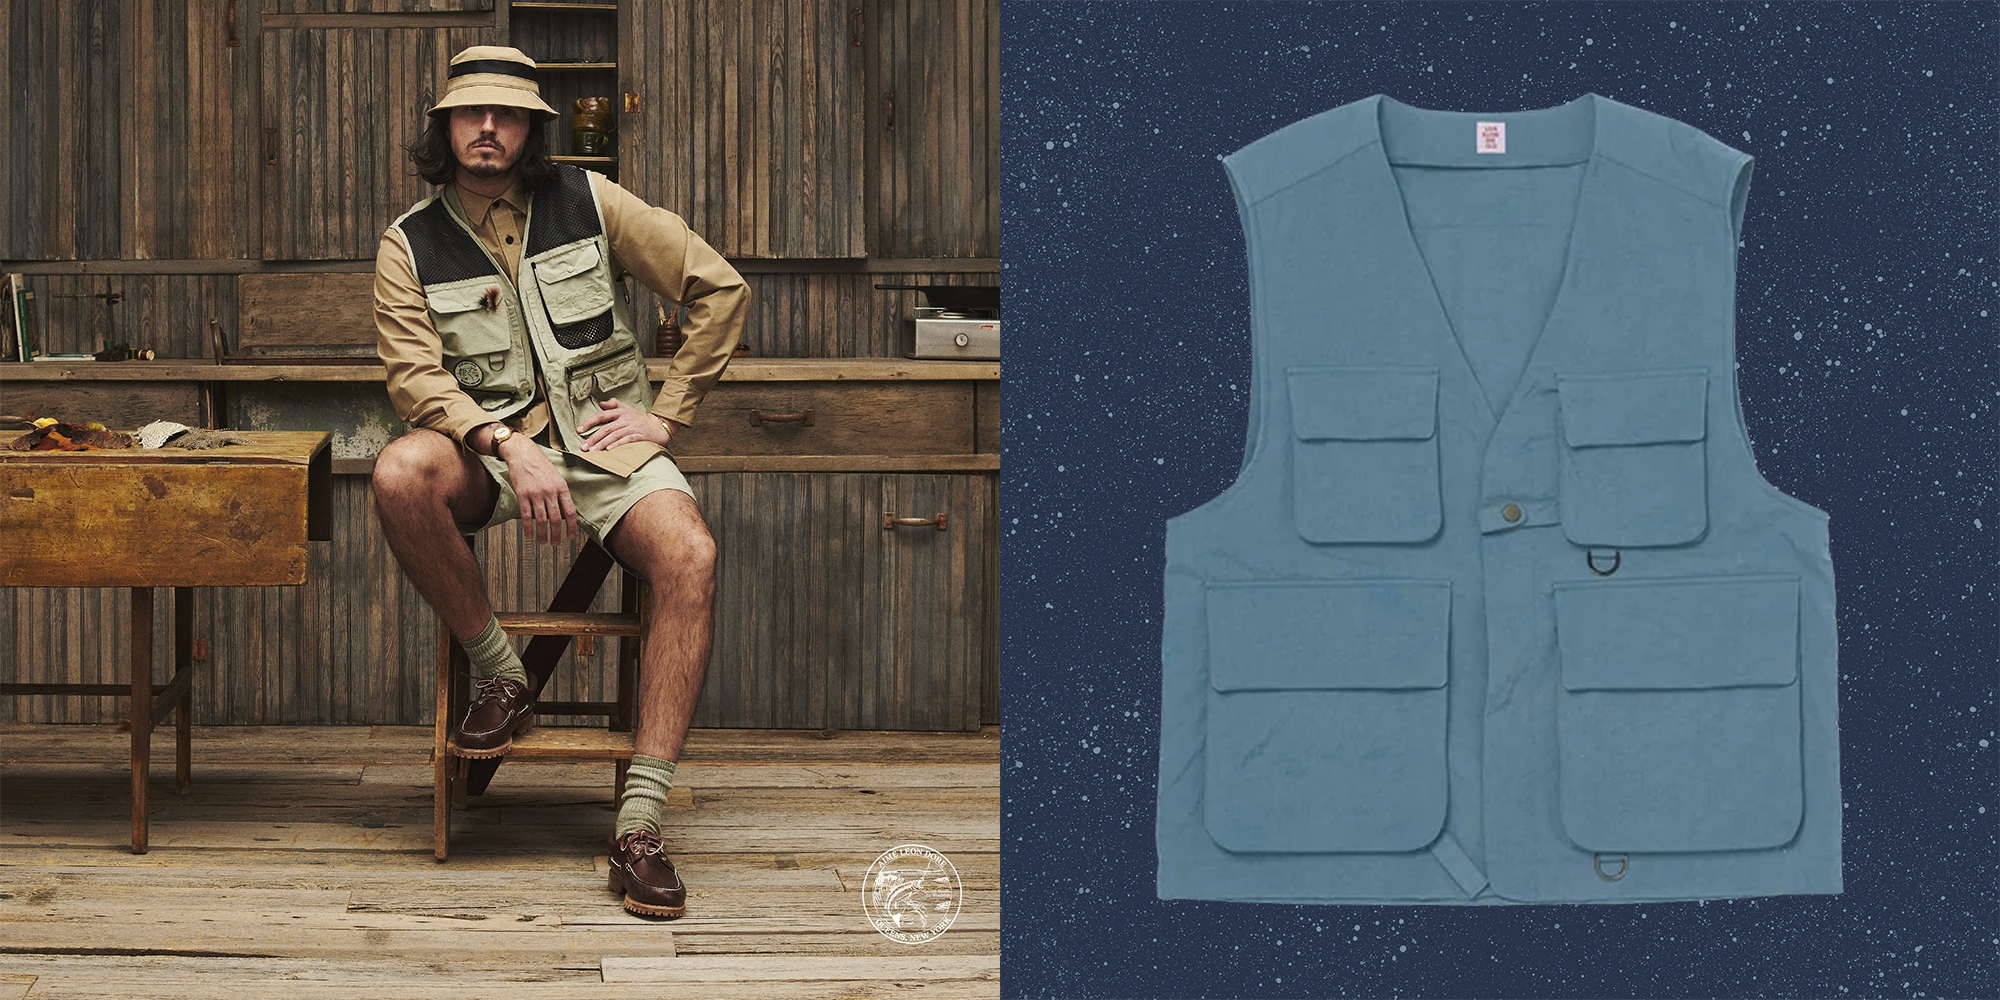 Aime Leon Dore and Woolrich Make Fishing Cool